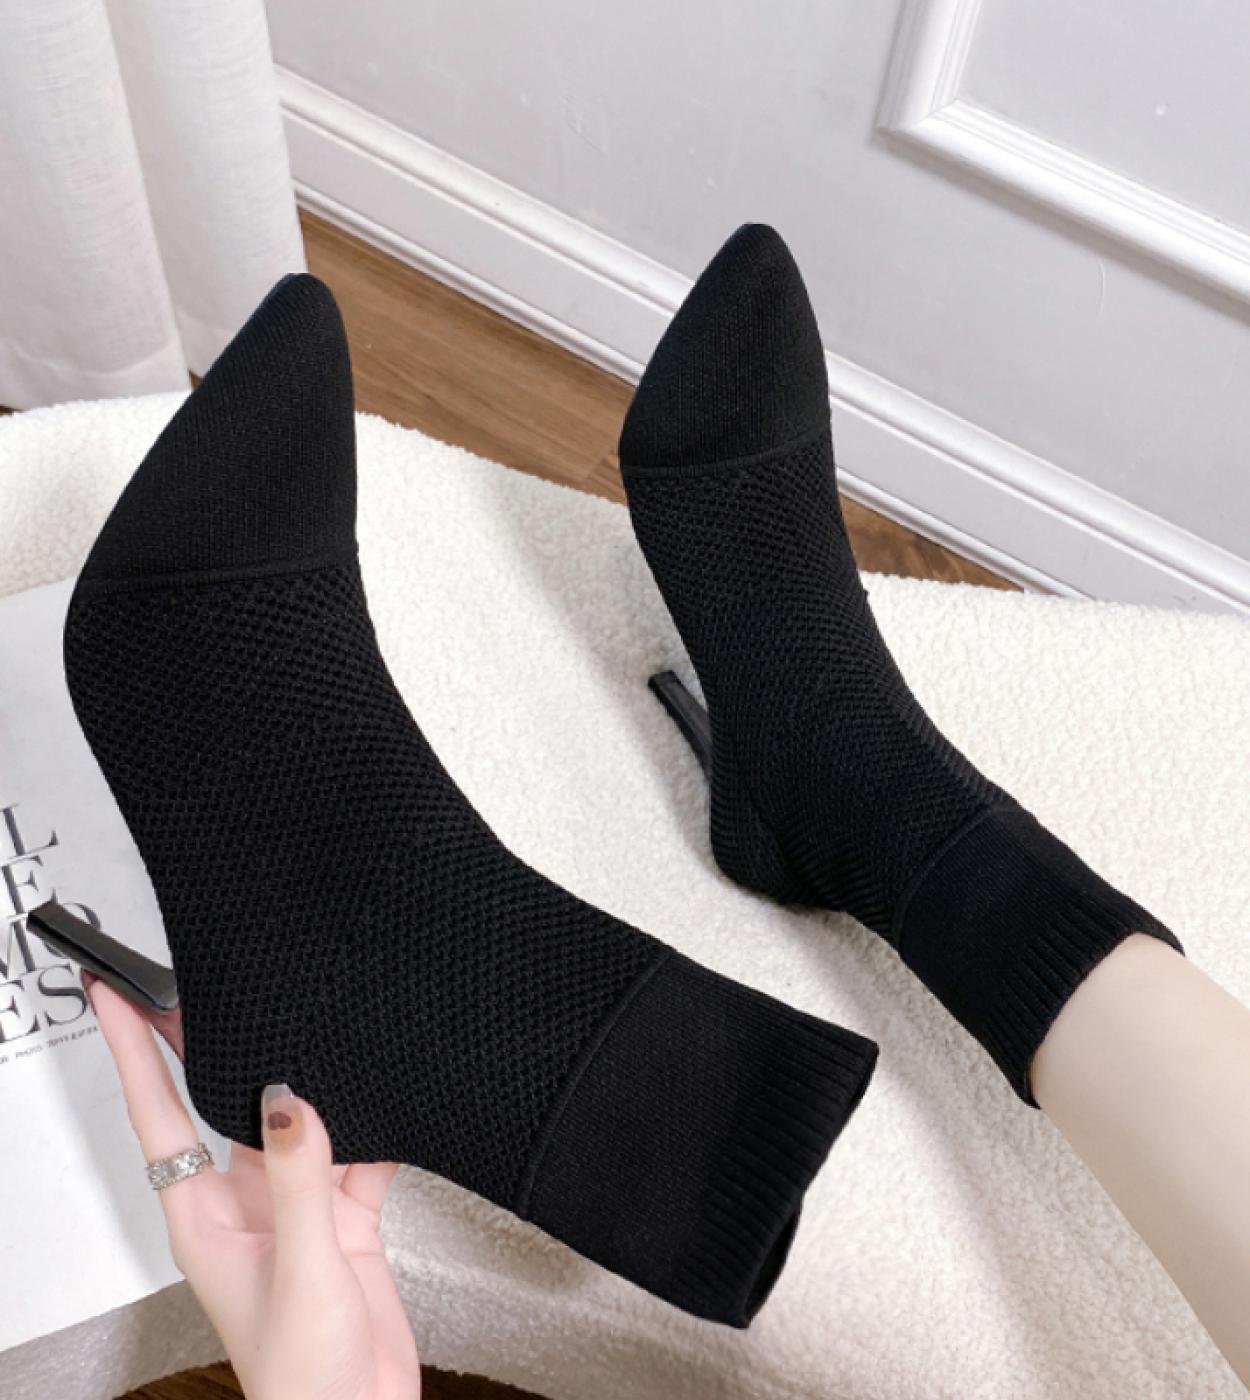 Women Sock Boots  Knitting Stretch Boots High Heels Shoes Female Thin Heel Ankle Botas Zapatos Mujer Primavera Verano 20